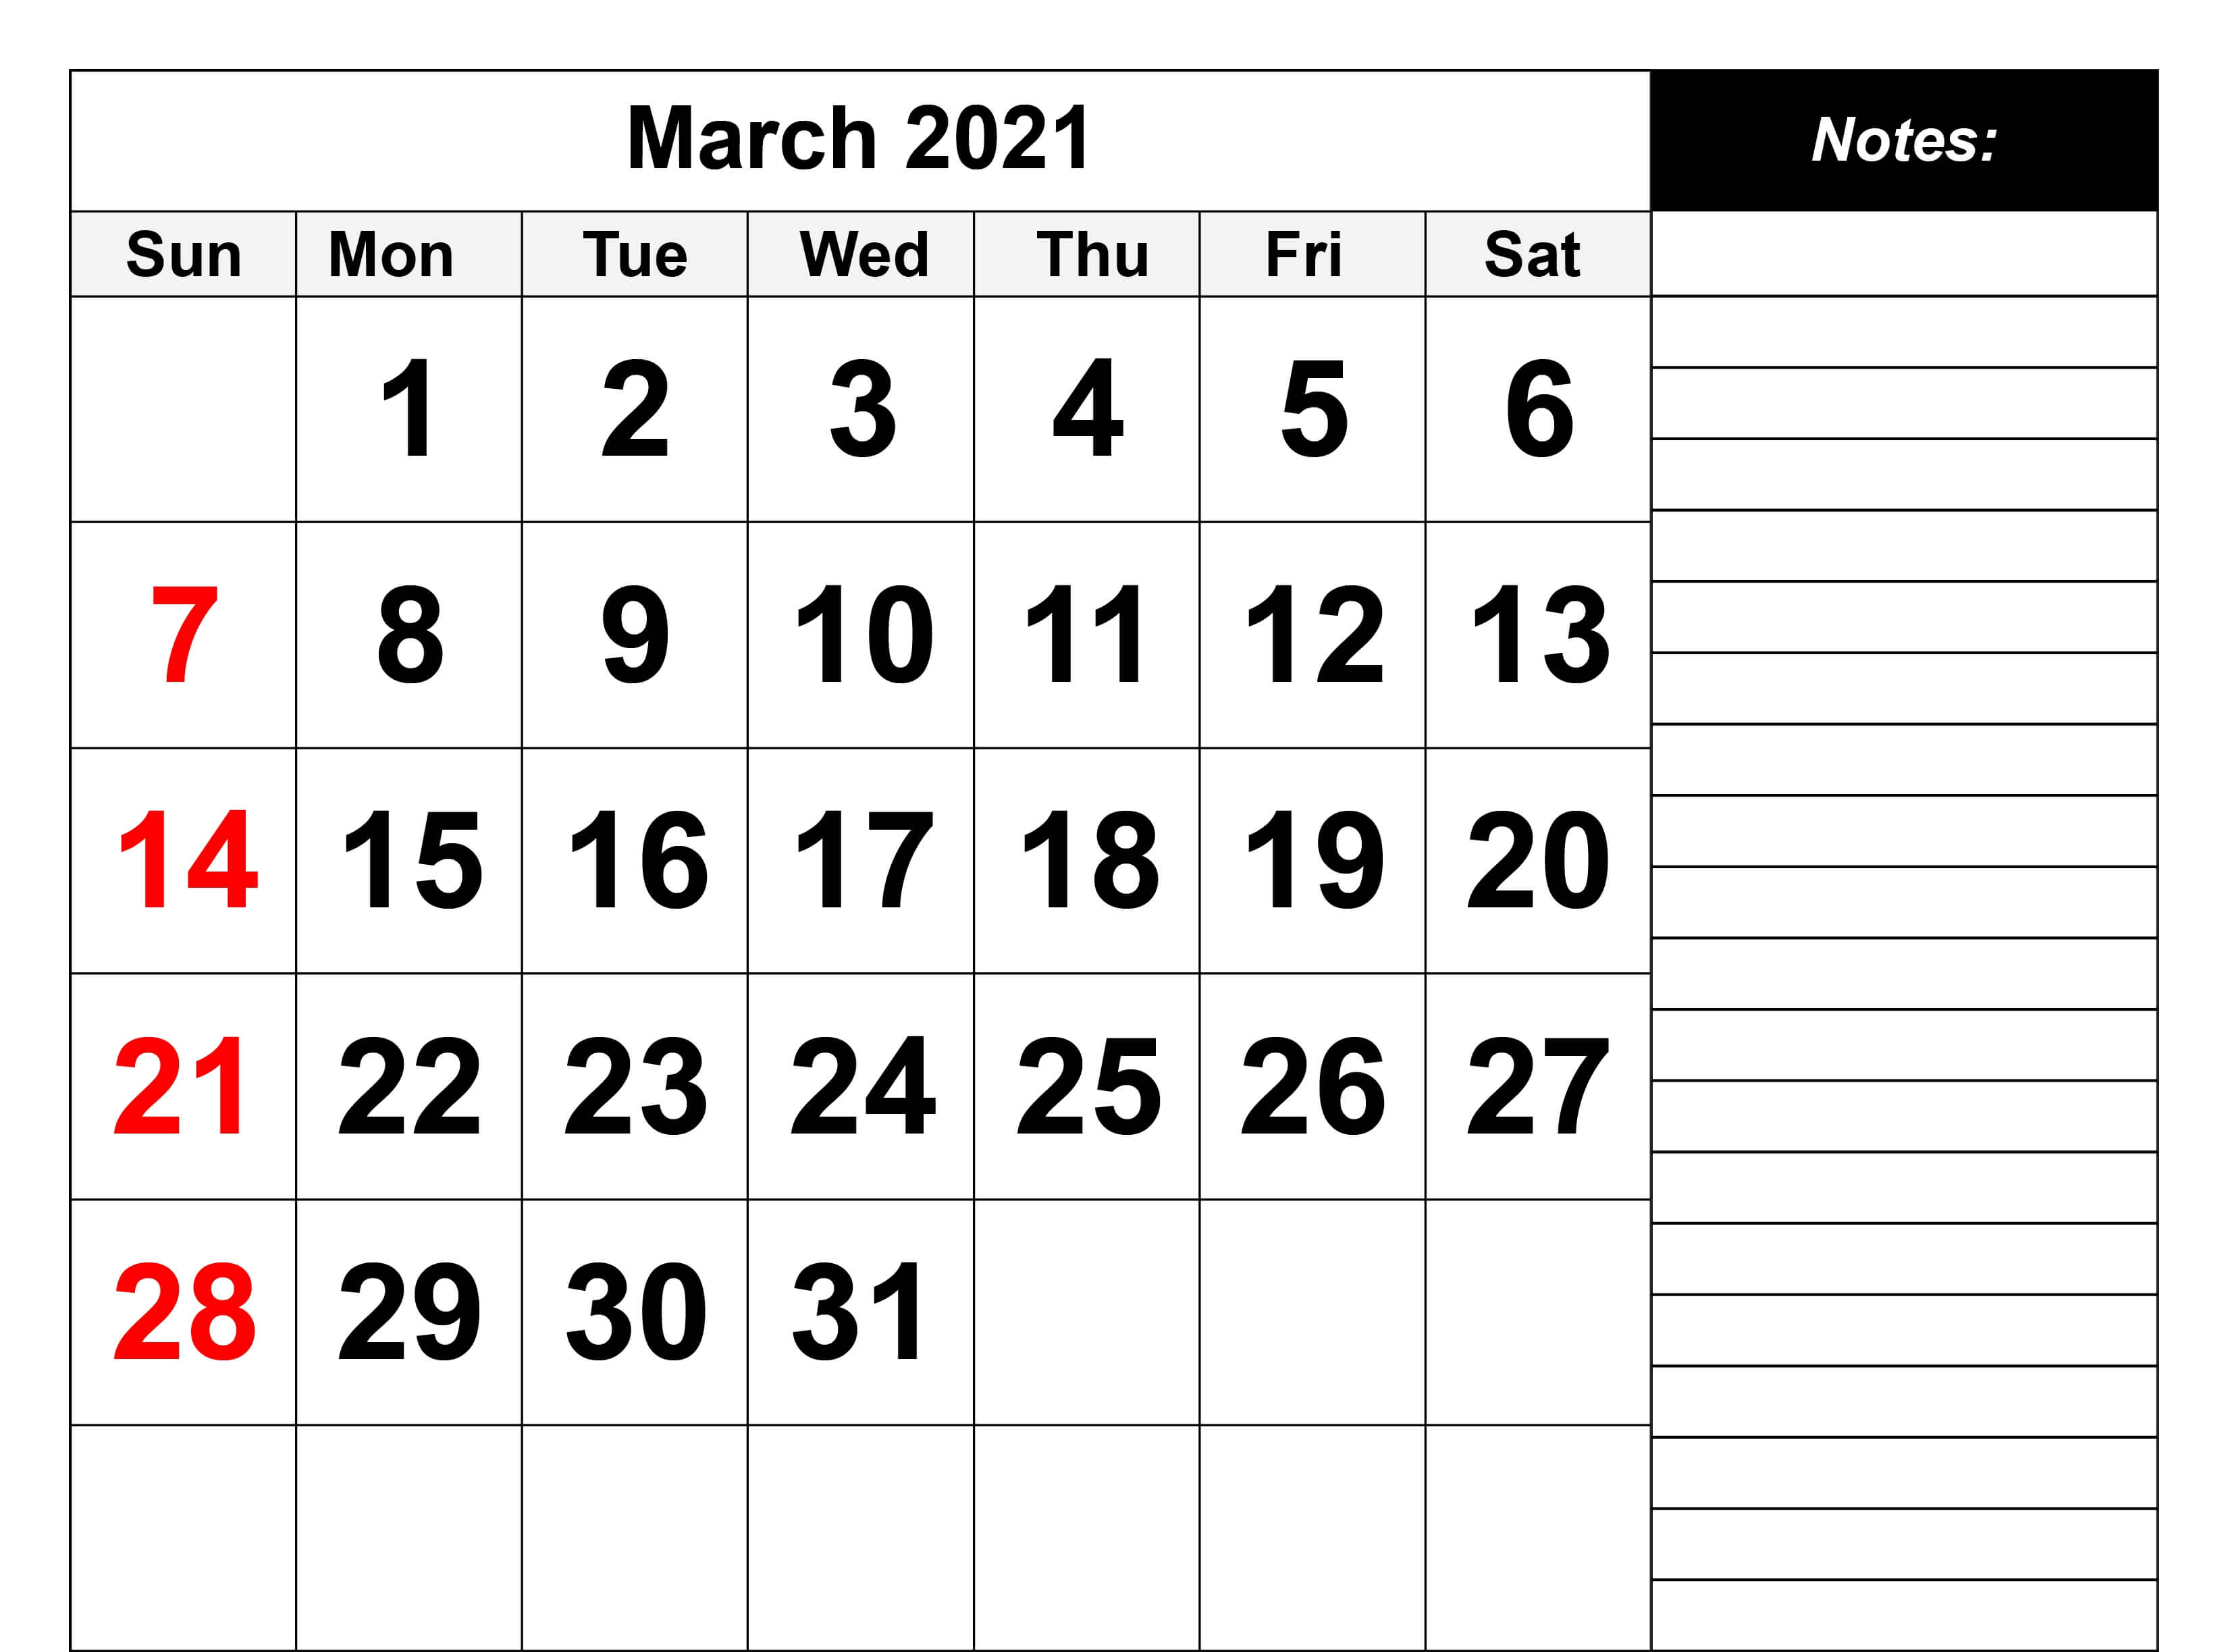 March 2021 Blank Calendar with Notes